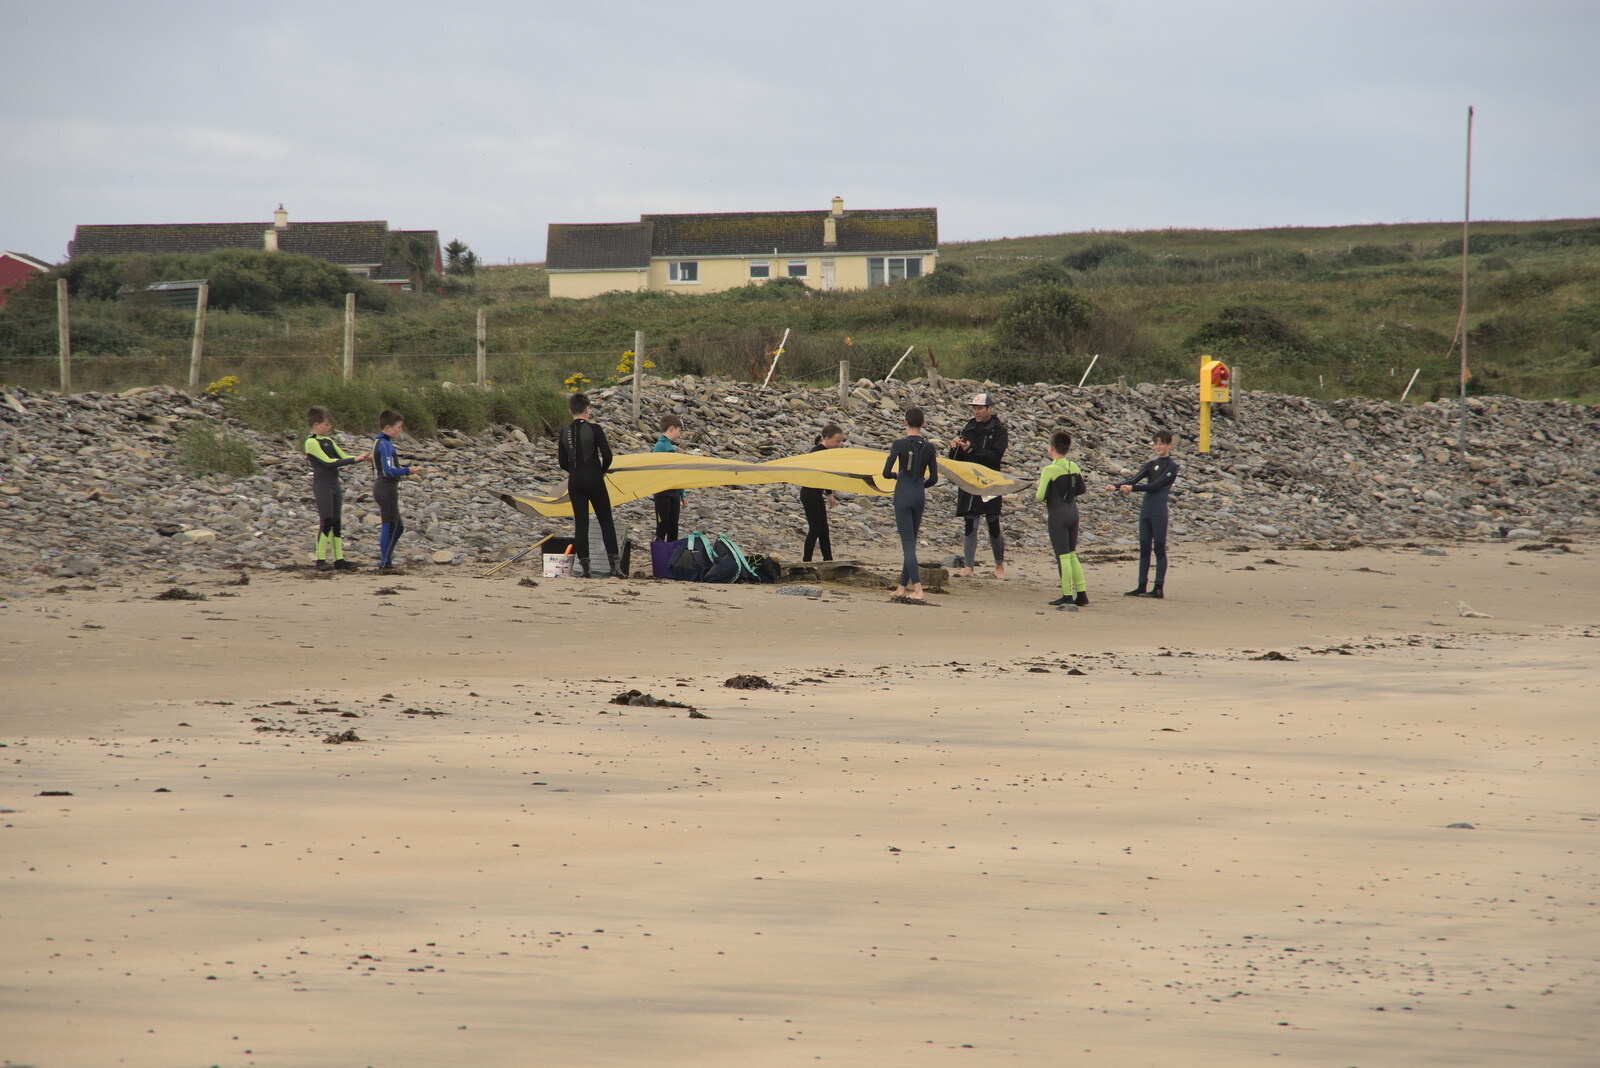 Pints of Guinness and Streedagh Beach, Grange and Sligo, Ireland - 9th August 2021: A surf school sets up for the afternoon